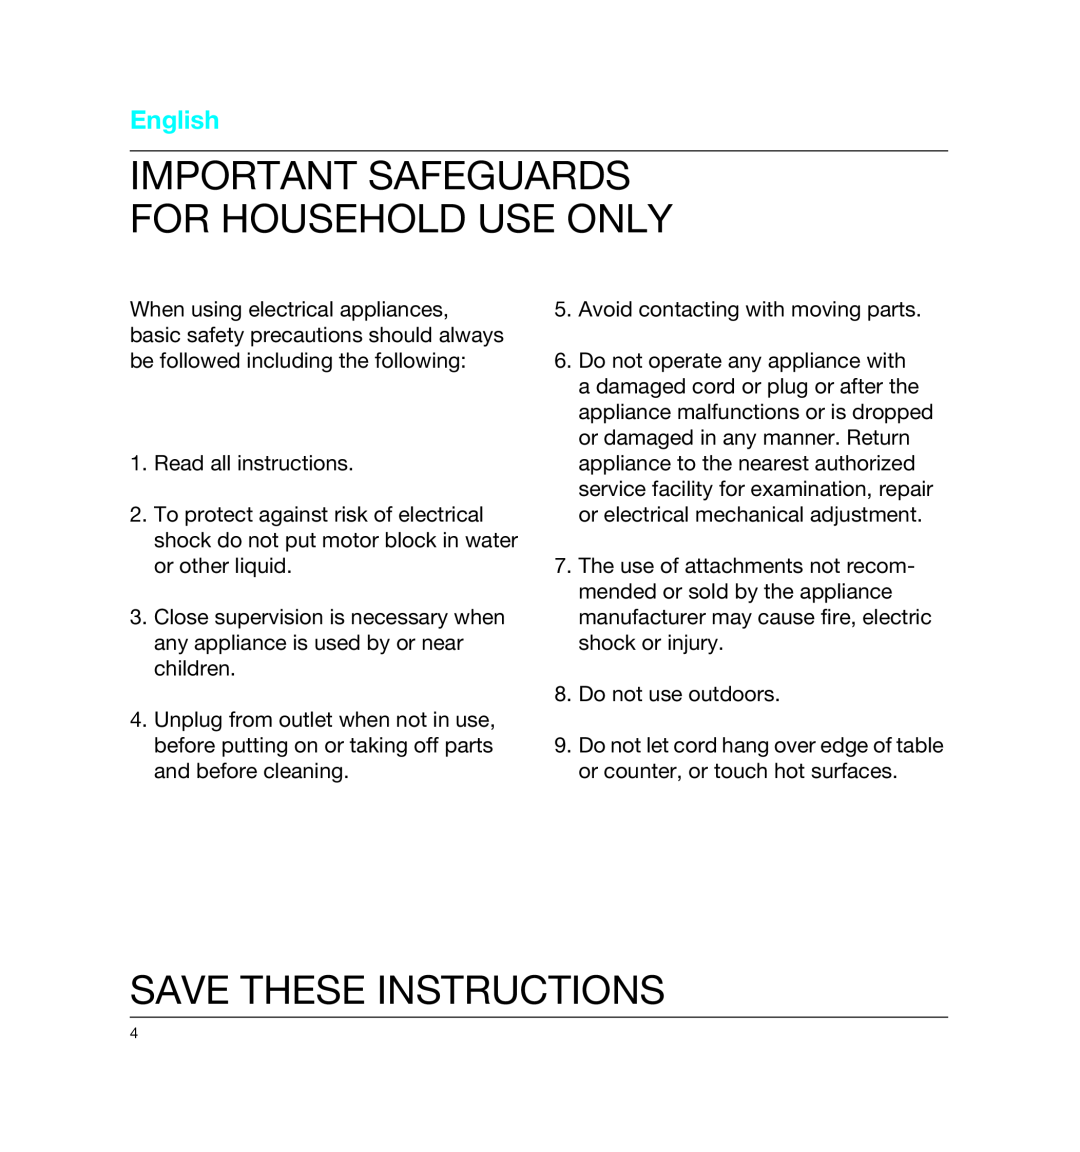 Braun MPZ6, 4161 manual Save These Instructions, Important Safeguards For Household Use Only, English 